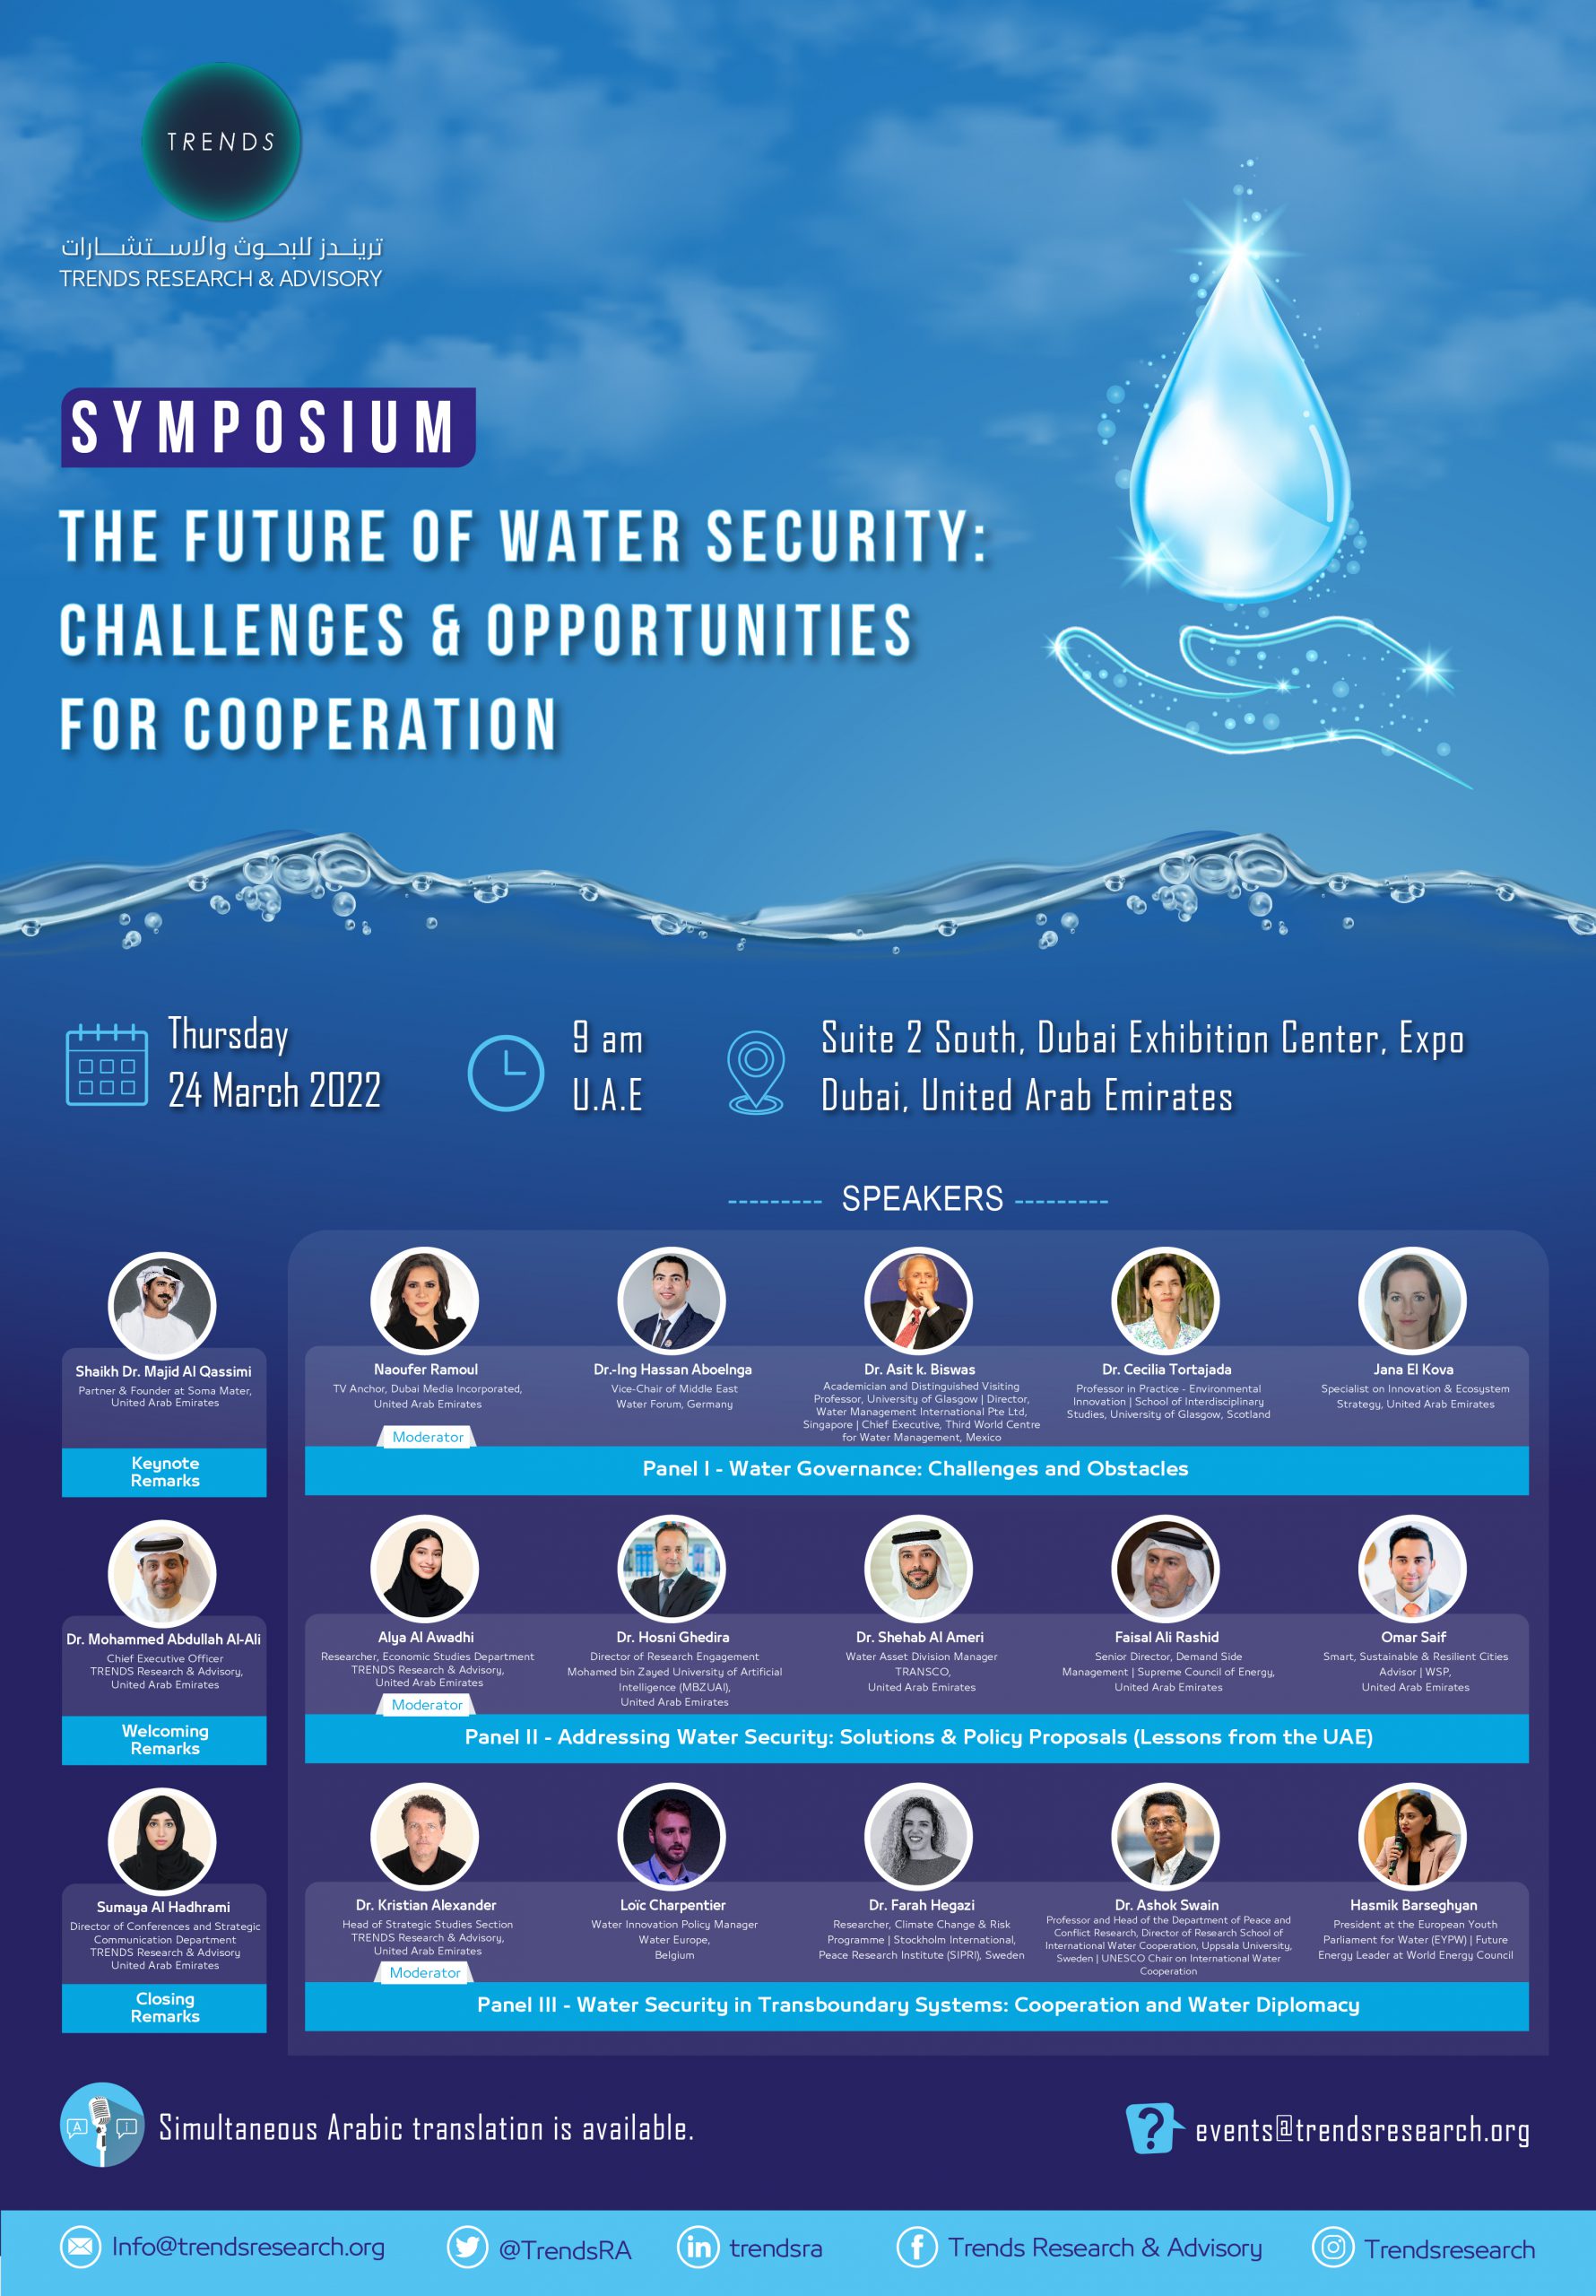 The Future of Water Security: Challenges and Opportunities for Cooperation